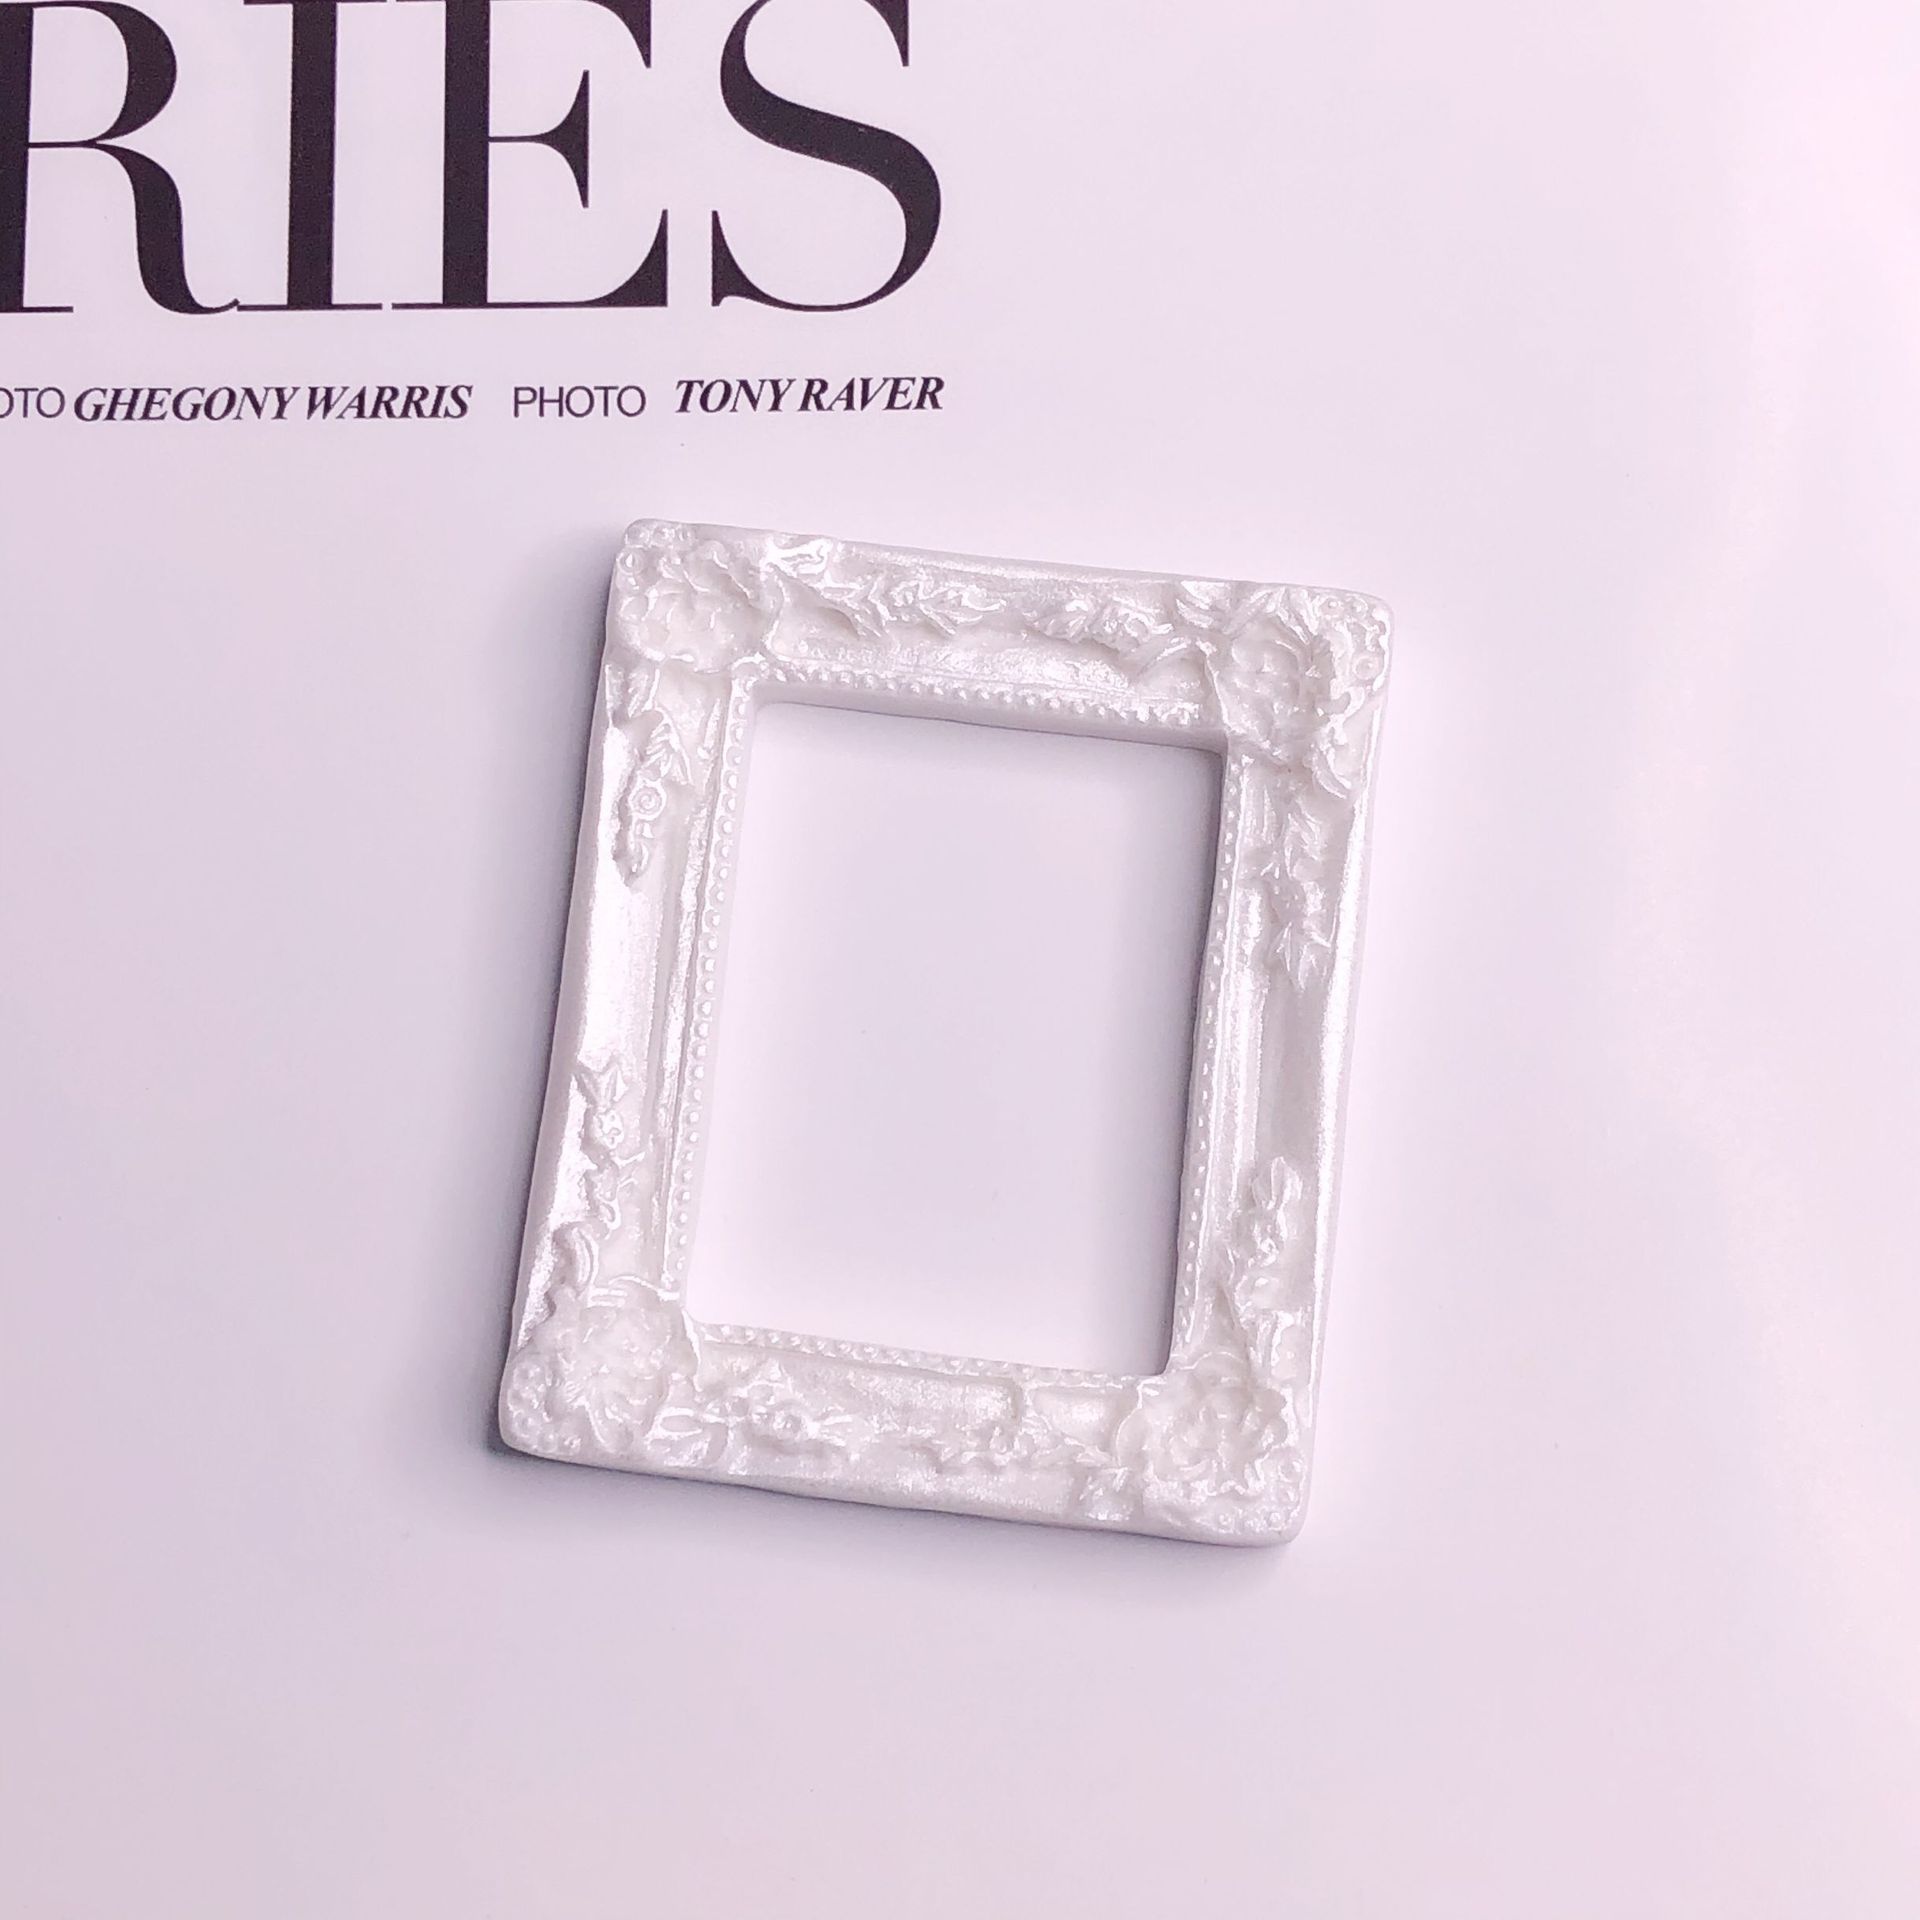 5:Off-white Pearl Large photo frame 5x6cm